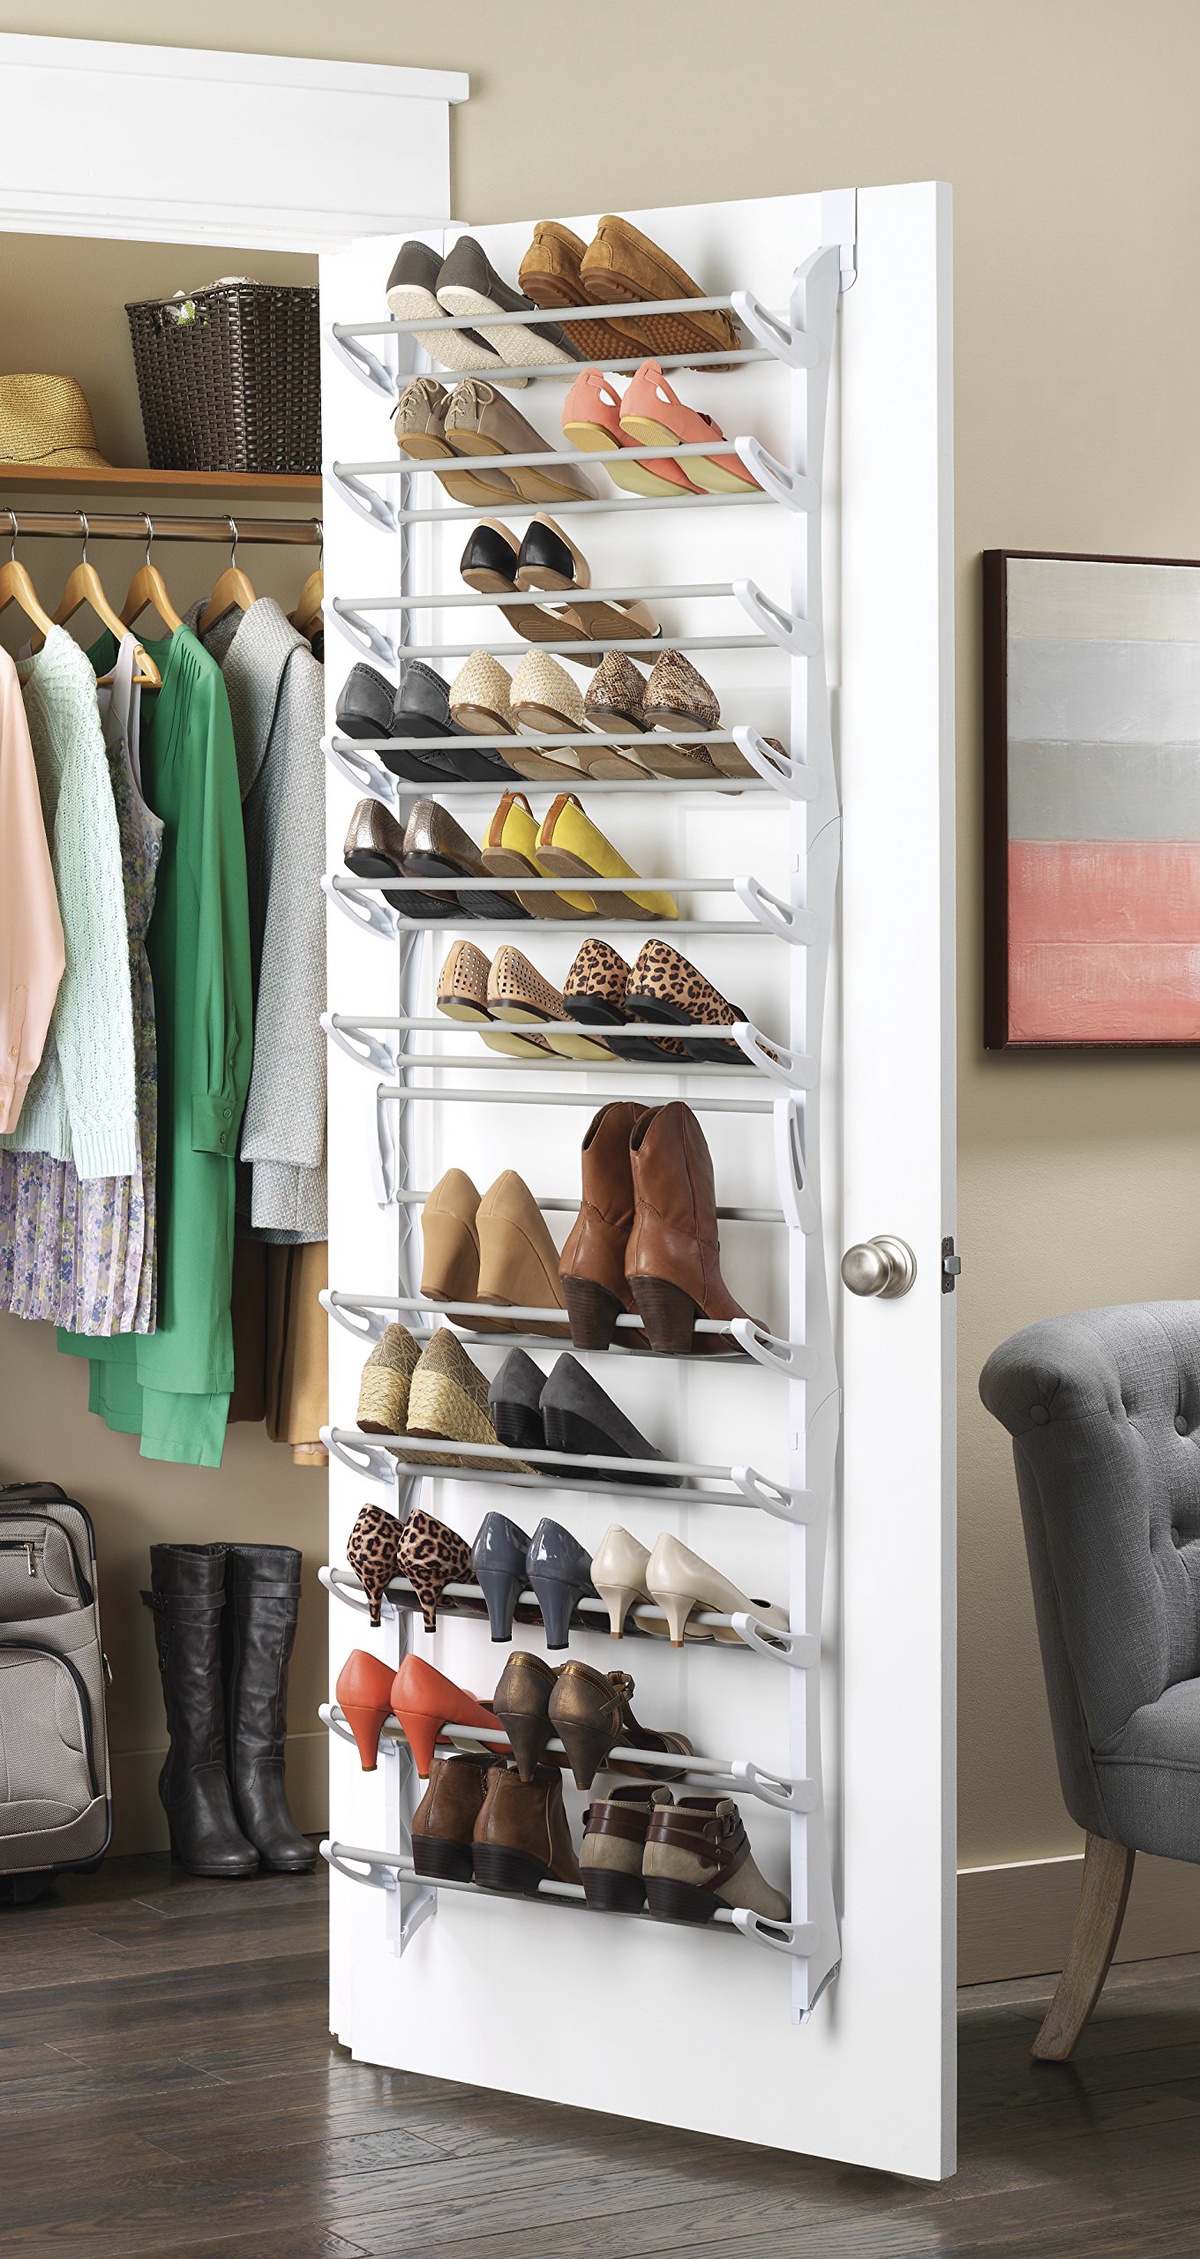 Organize Your Space Efficiently with a Shoe Rack Behind the Door